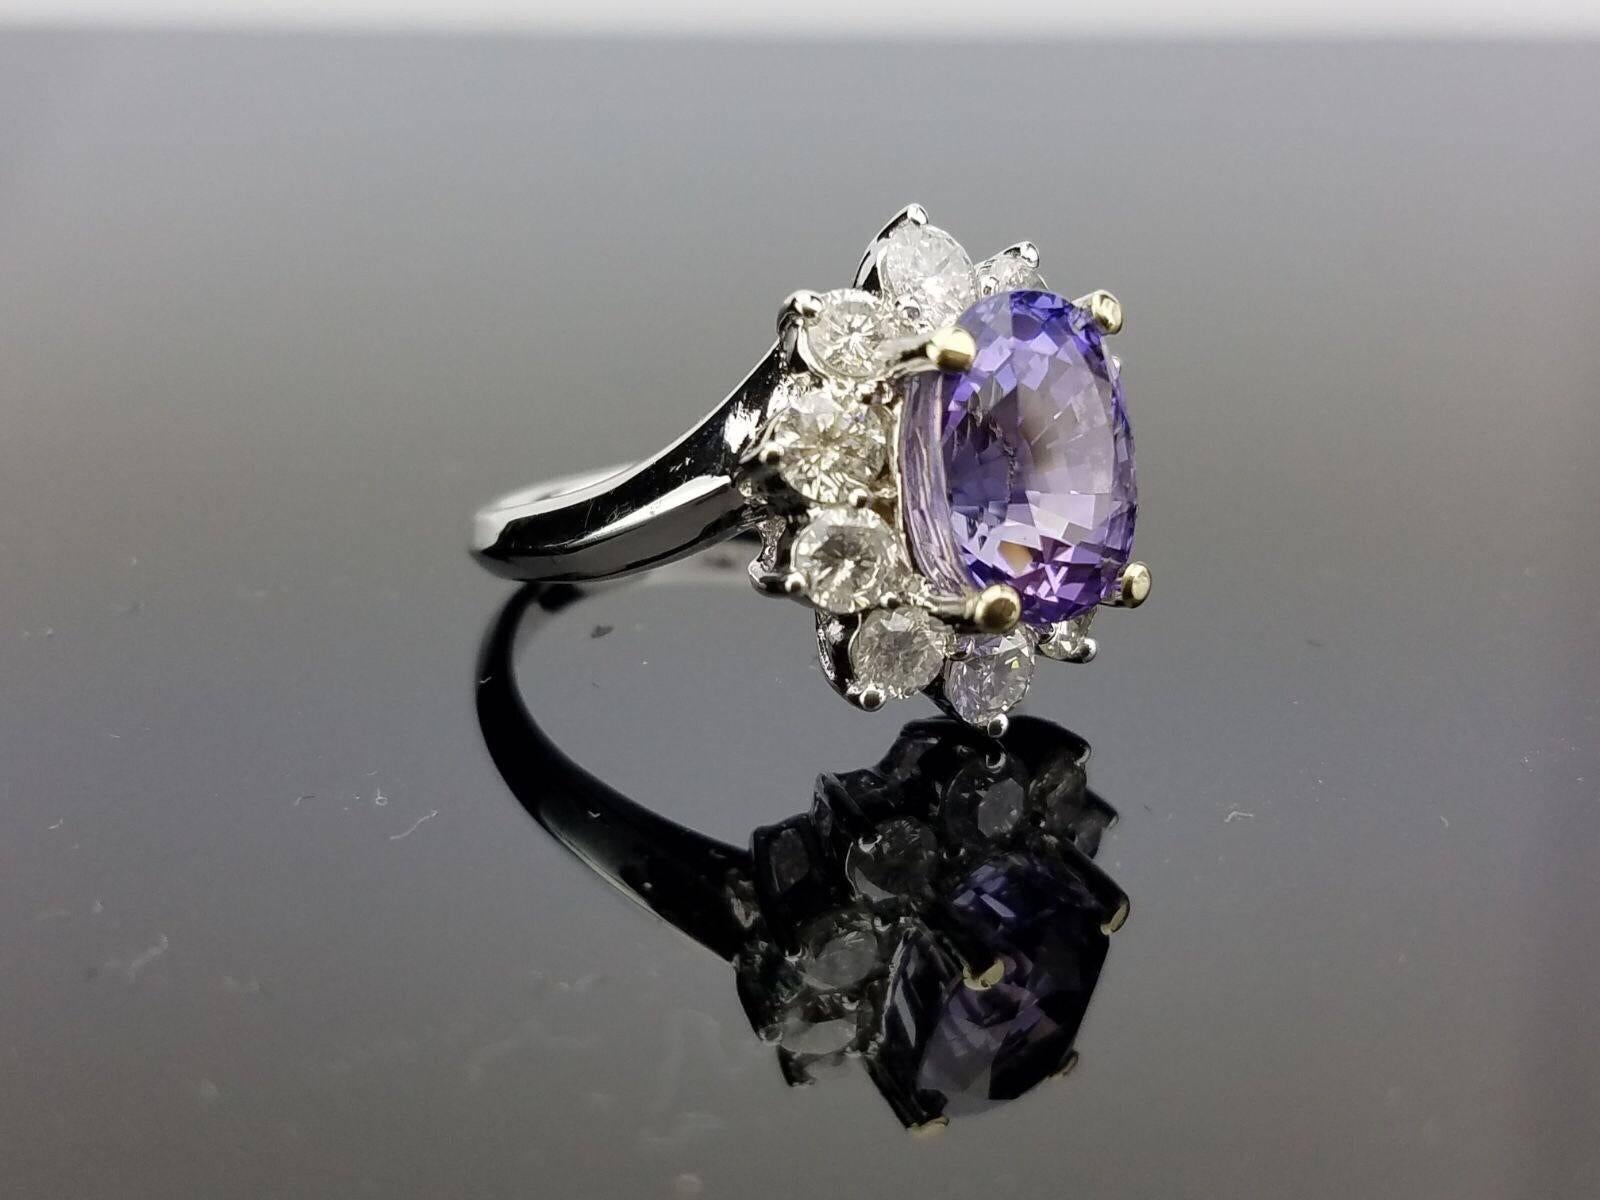 Light Purple Sapphire and Diamond Ring on 18K White Gold Band

Center Stone Details: 
Stone: Sapphire
Cut: Oval
Weight: 4.89 carat

Diamond Details: 
Cut: Brilliant (round)
Total Carat Weight: 1.3 carat
Quality: VS , H/I/J 

18K Gold: 6.61